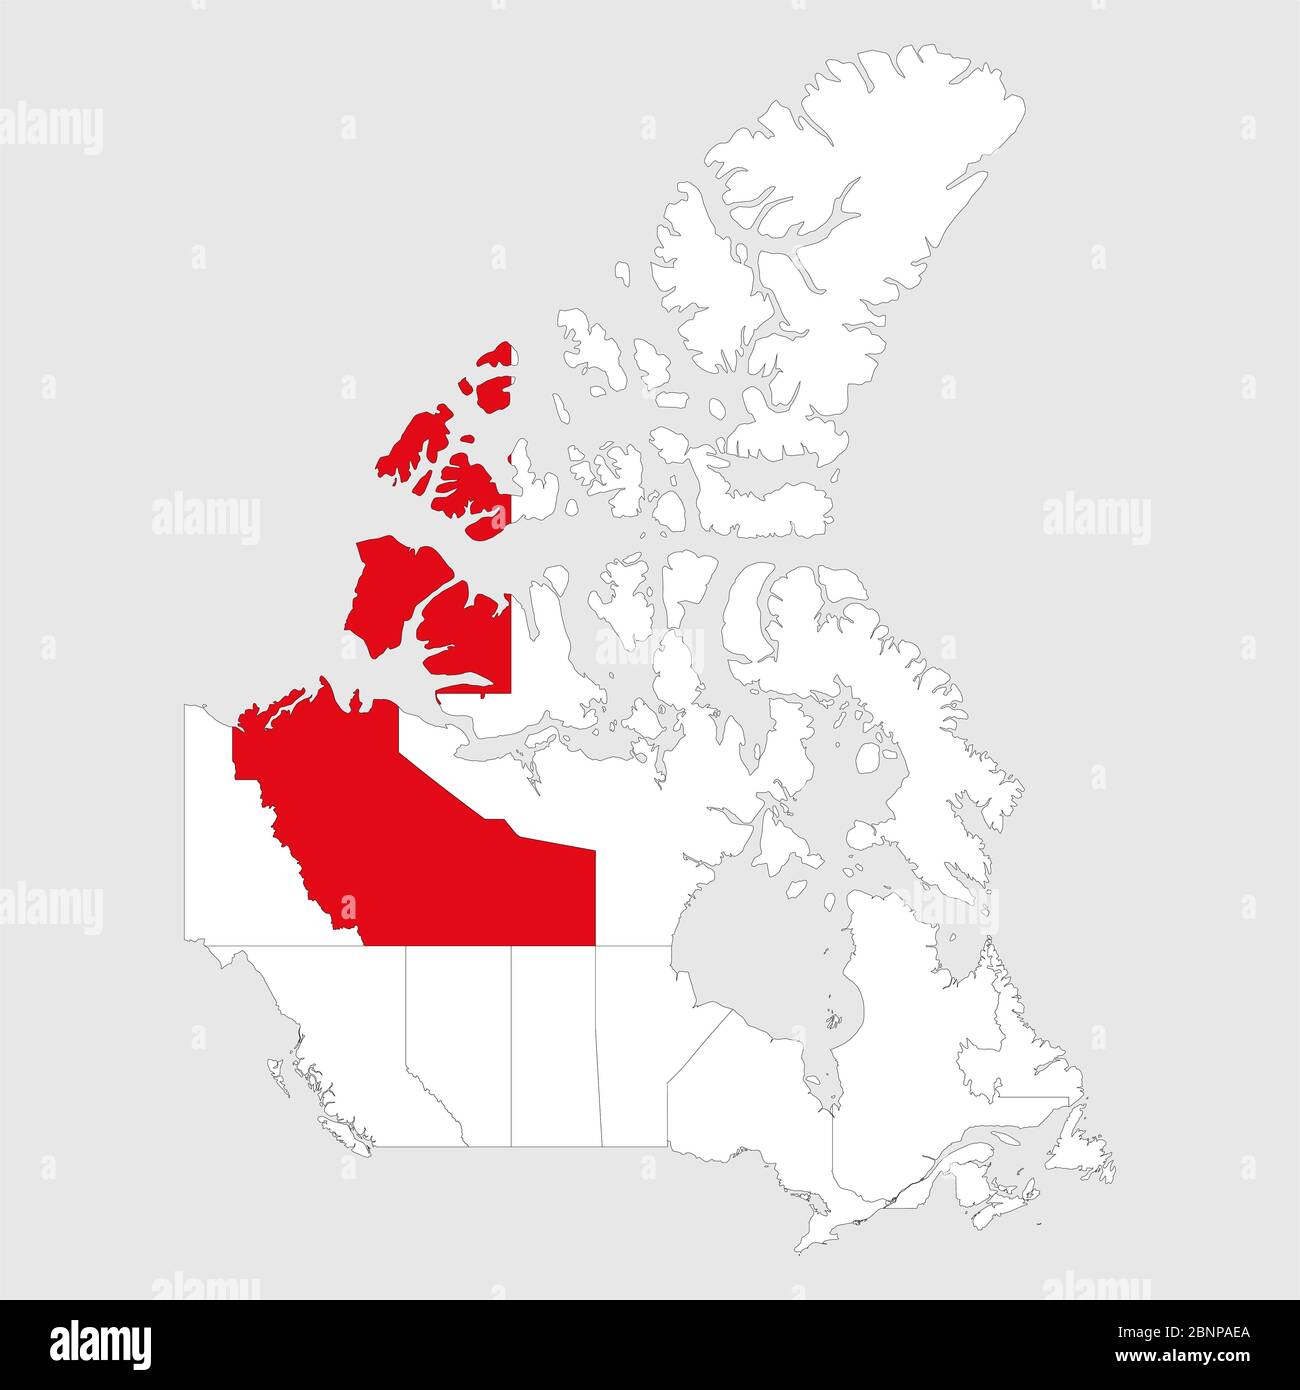 Northwest territories highlighted on canada map. Gray background. Canadian political map. Stock Vector